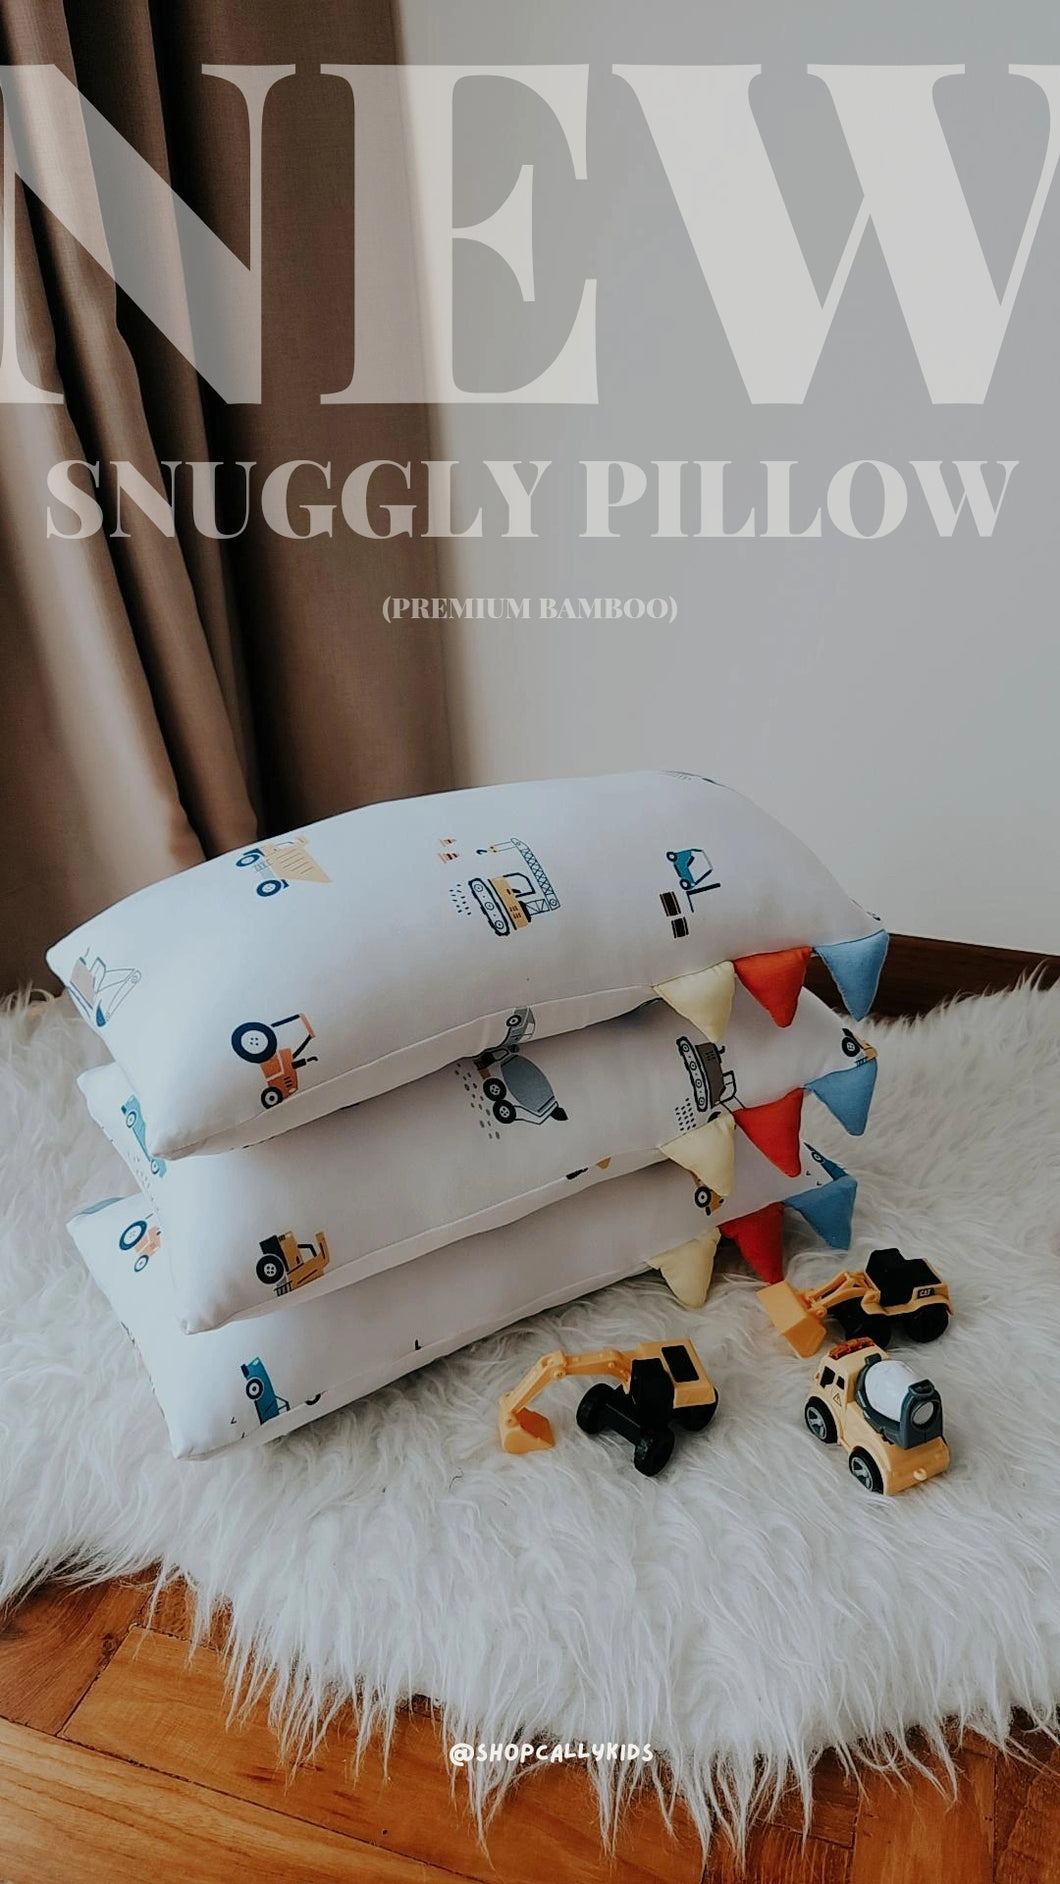 Snuggly Pillow - Construction Vehicles (Premium Bamboo)